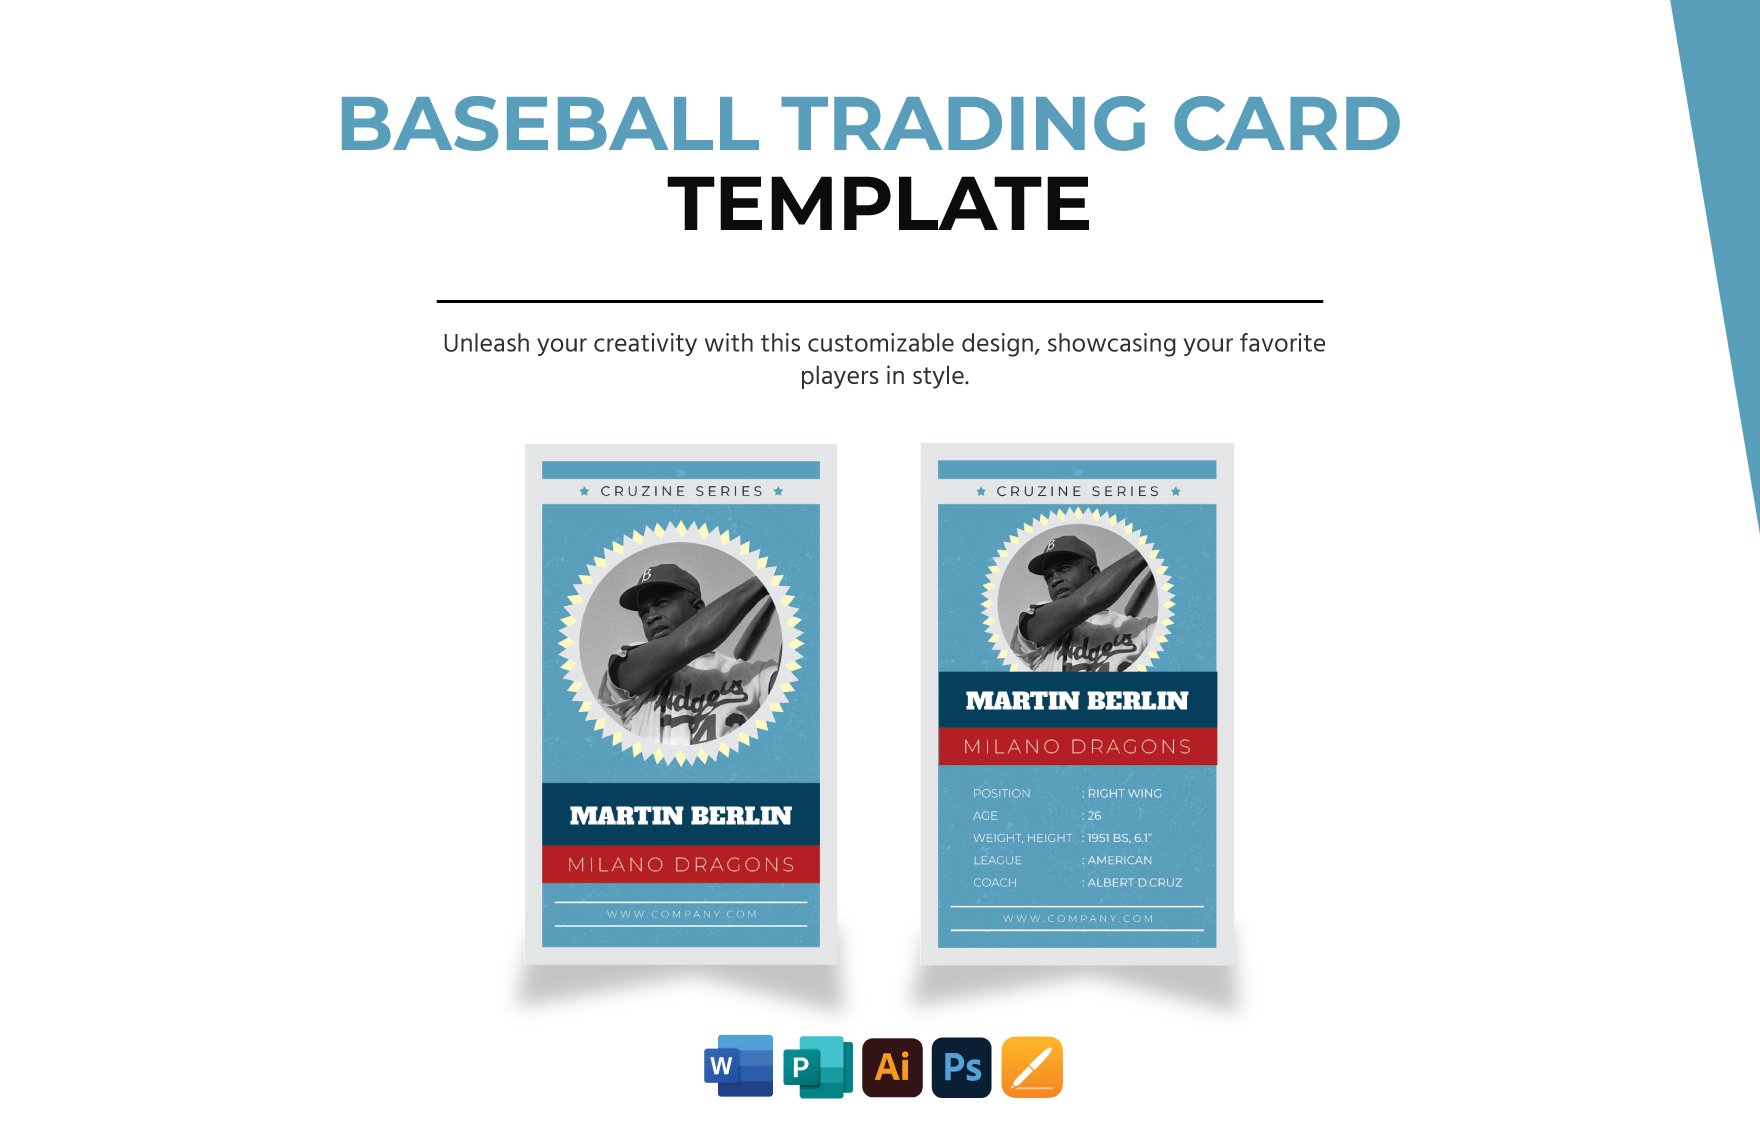 Baseball Trading Card Template in Word, Illustrator, PSD, Apple Pages, Publisher